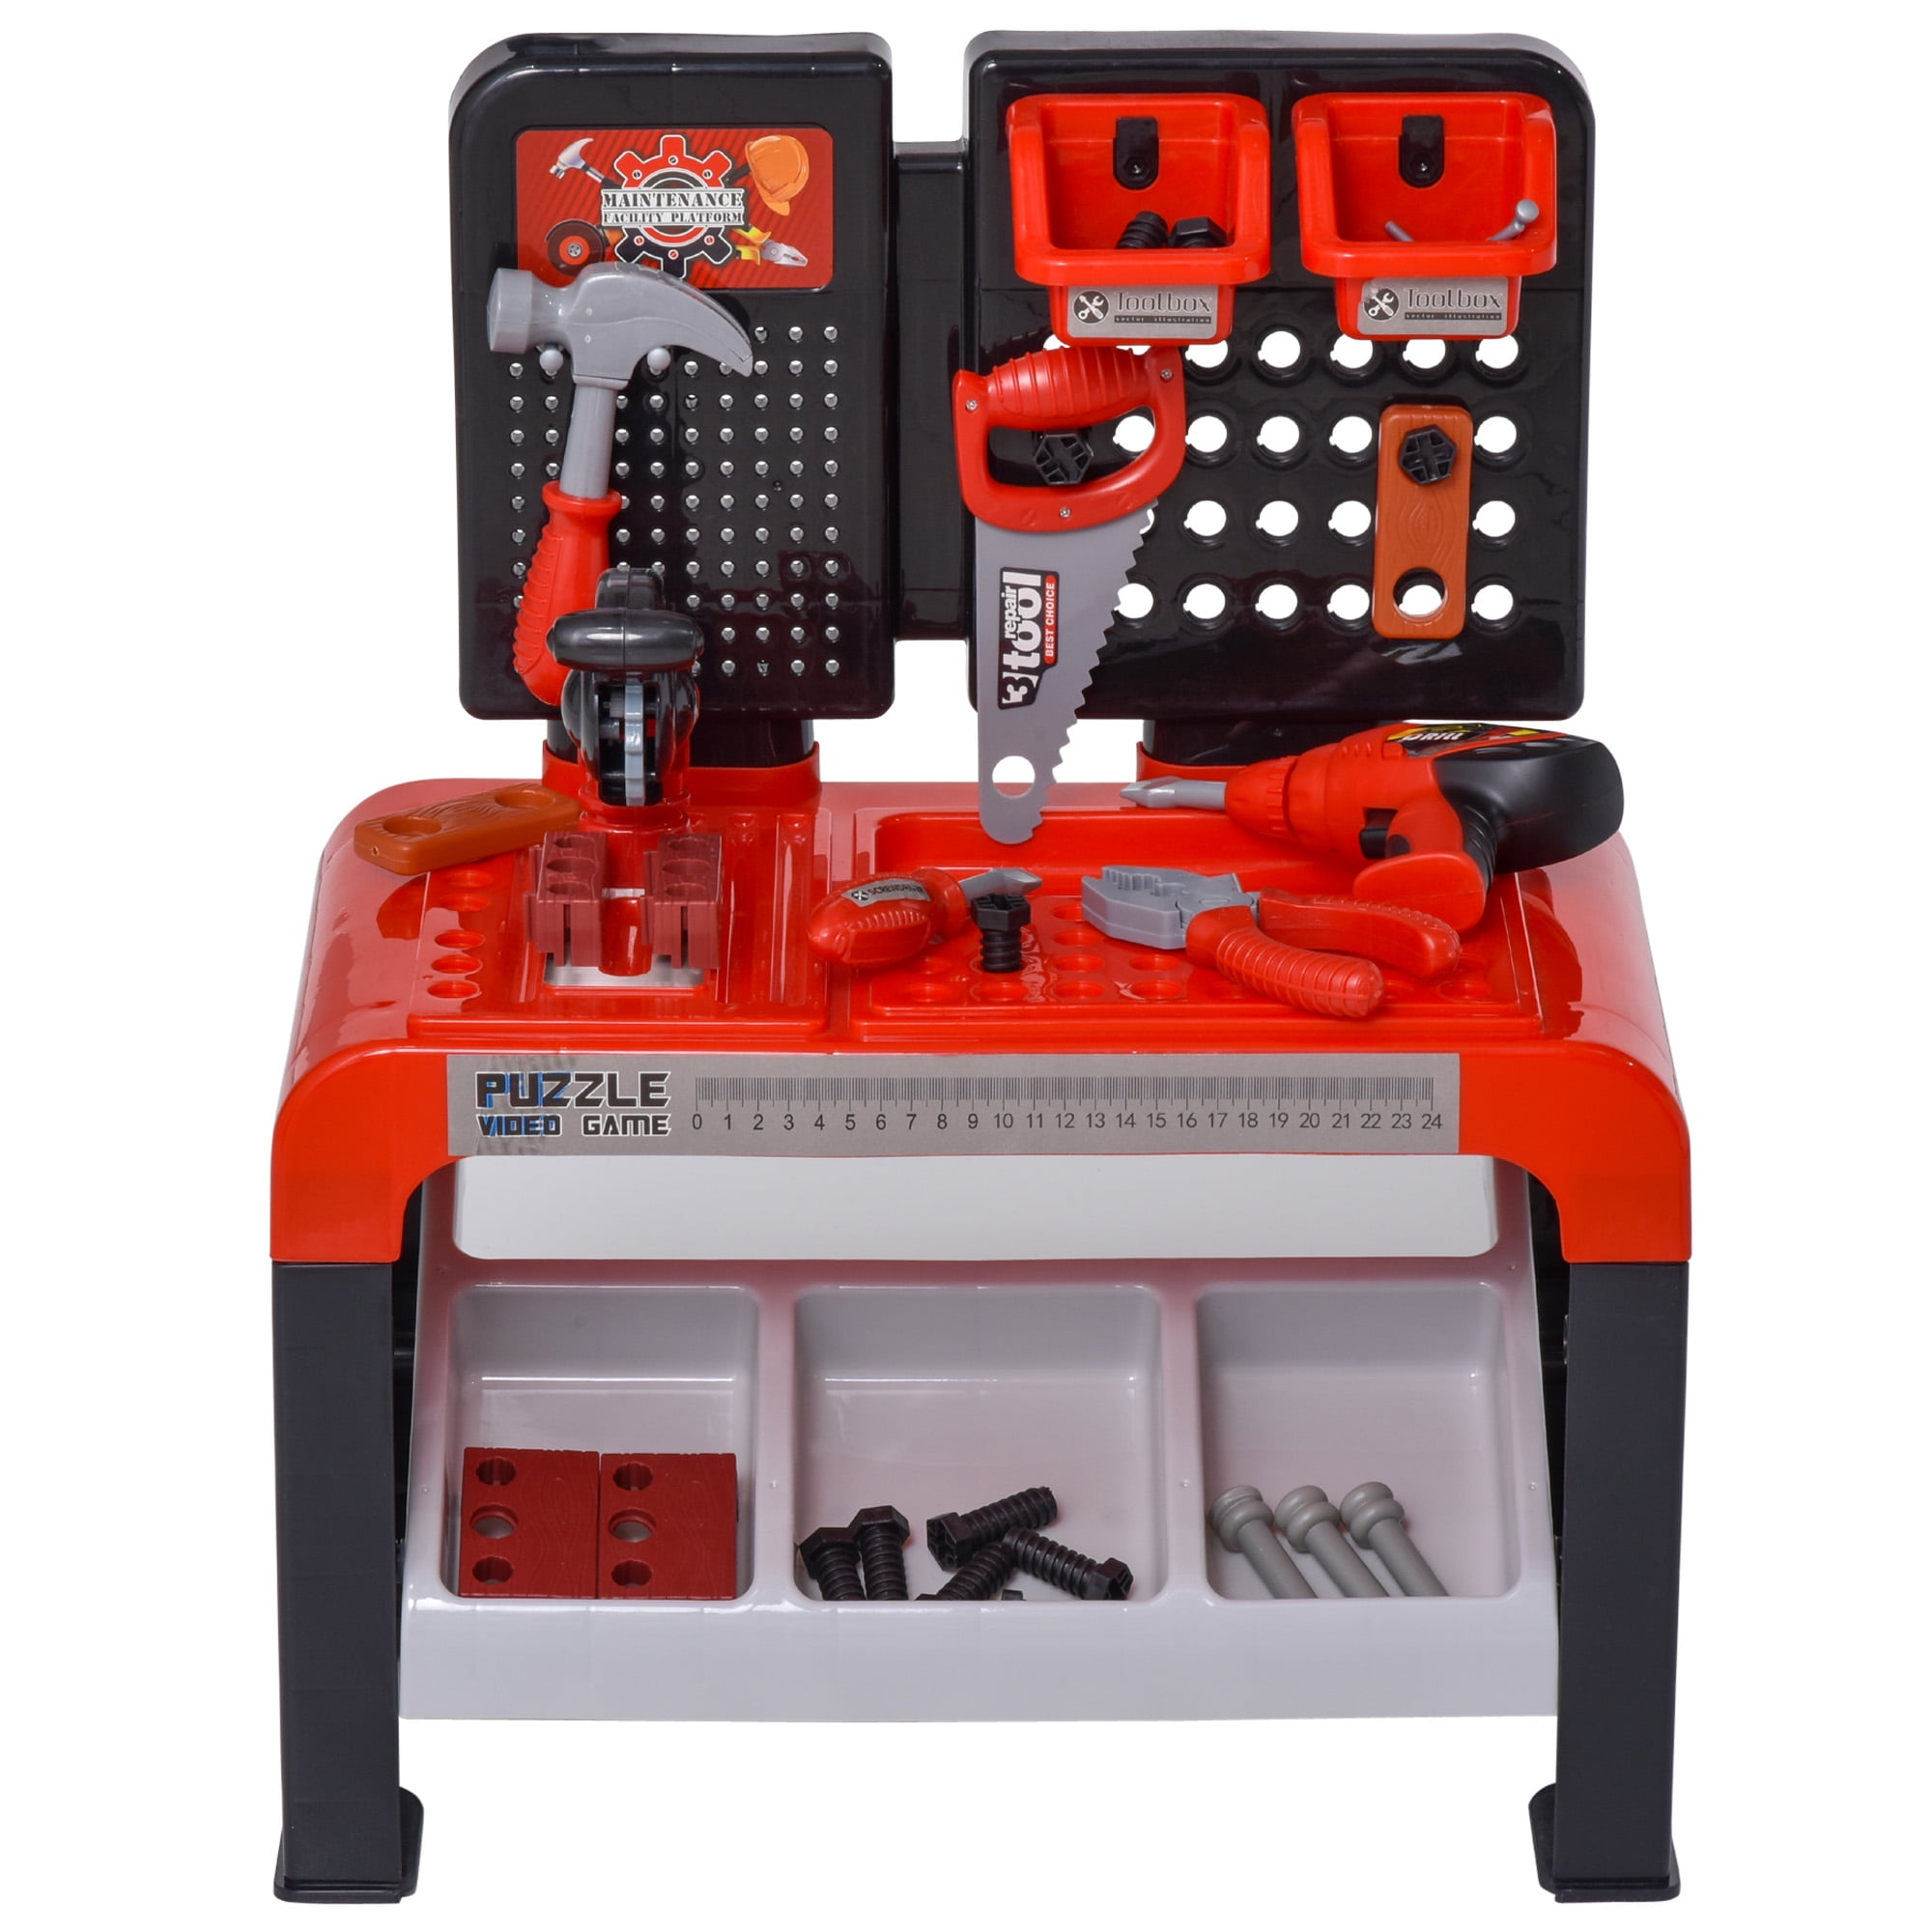 Qaba 64 Piece Tool Workshop Kids Play Set Workbench and Construction Toy for 3+-Year-Old with Shelf Storage Box